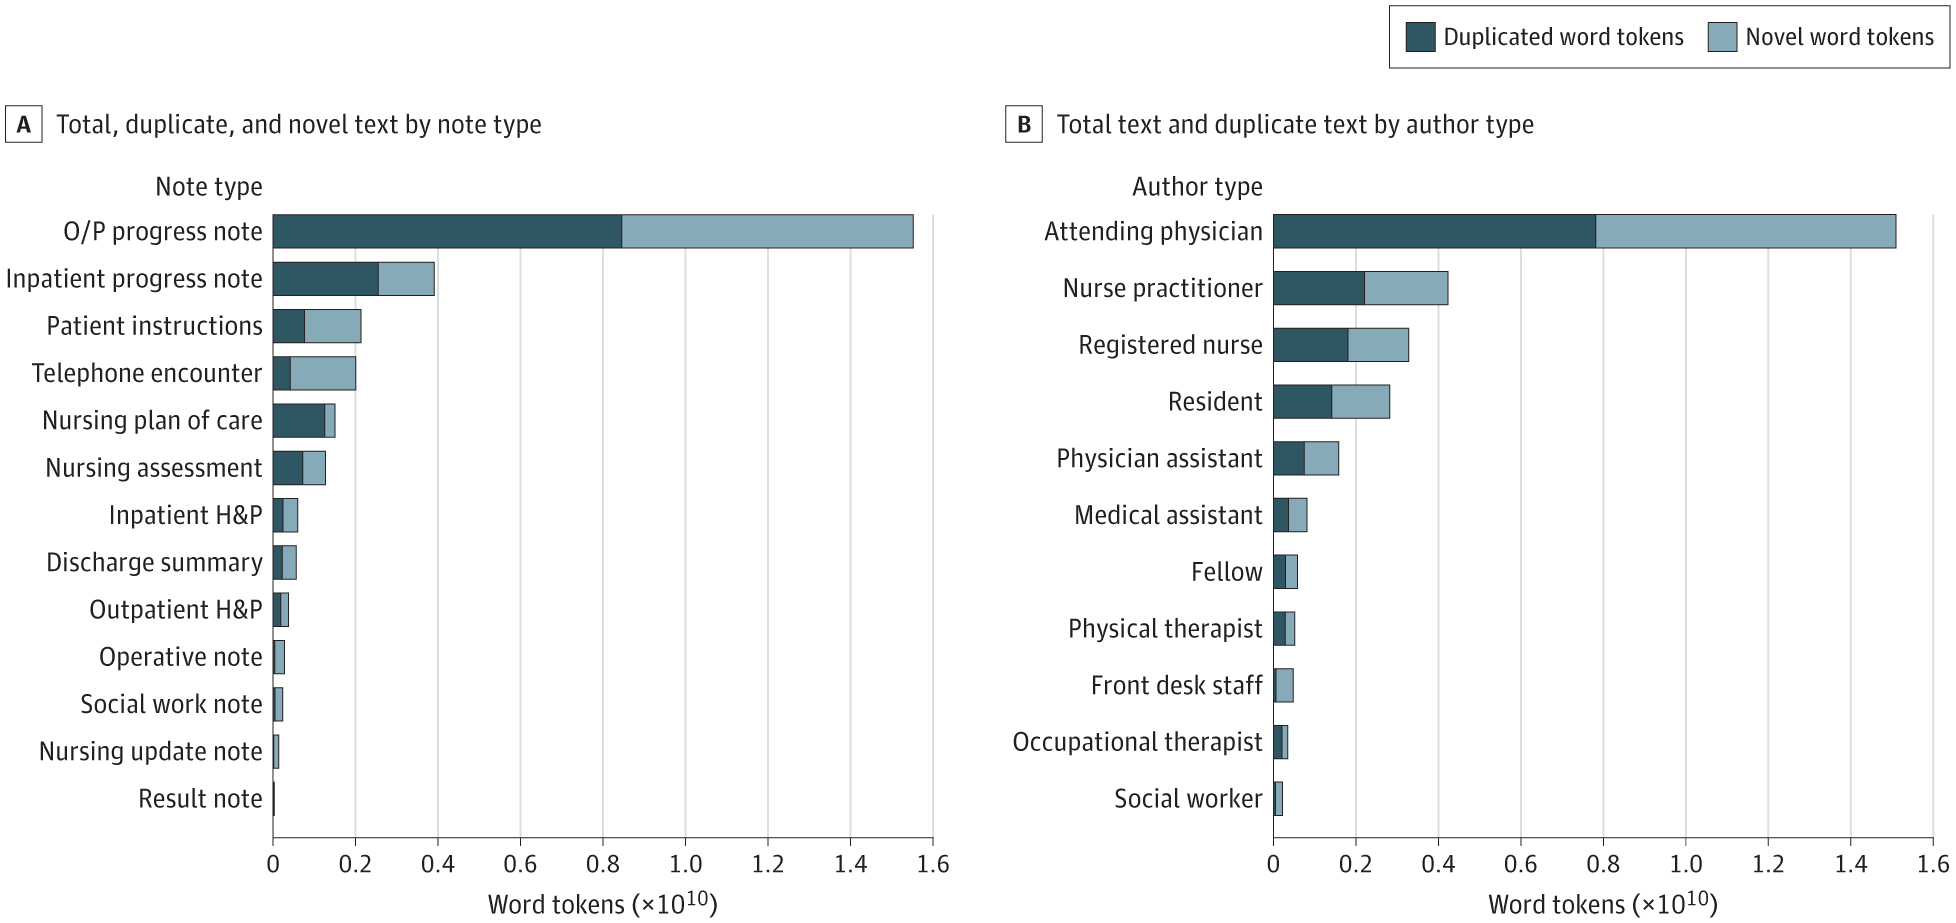 Prevalence and Sources of Duplicate Information in the Electronic Medical Record